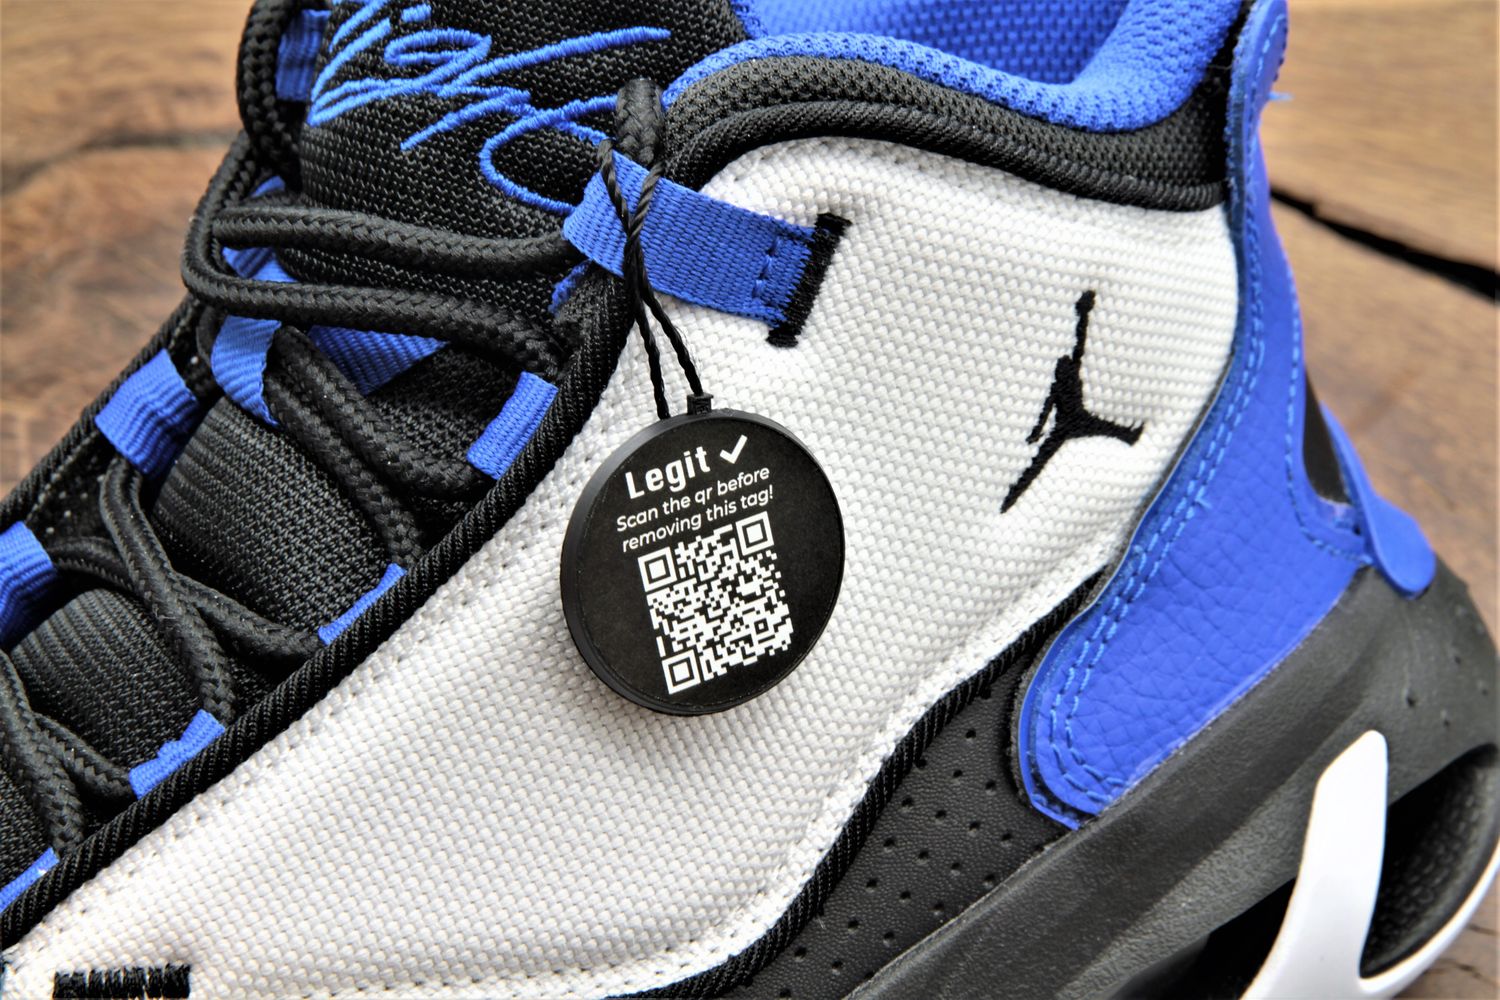 Lock-tag Arrow for shoes (sneaker)